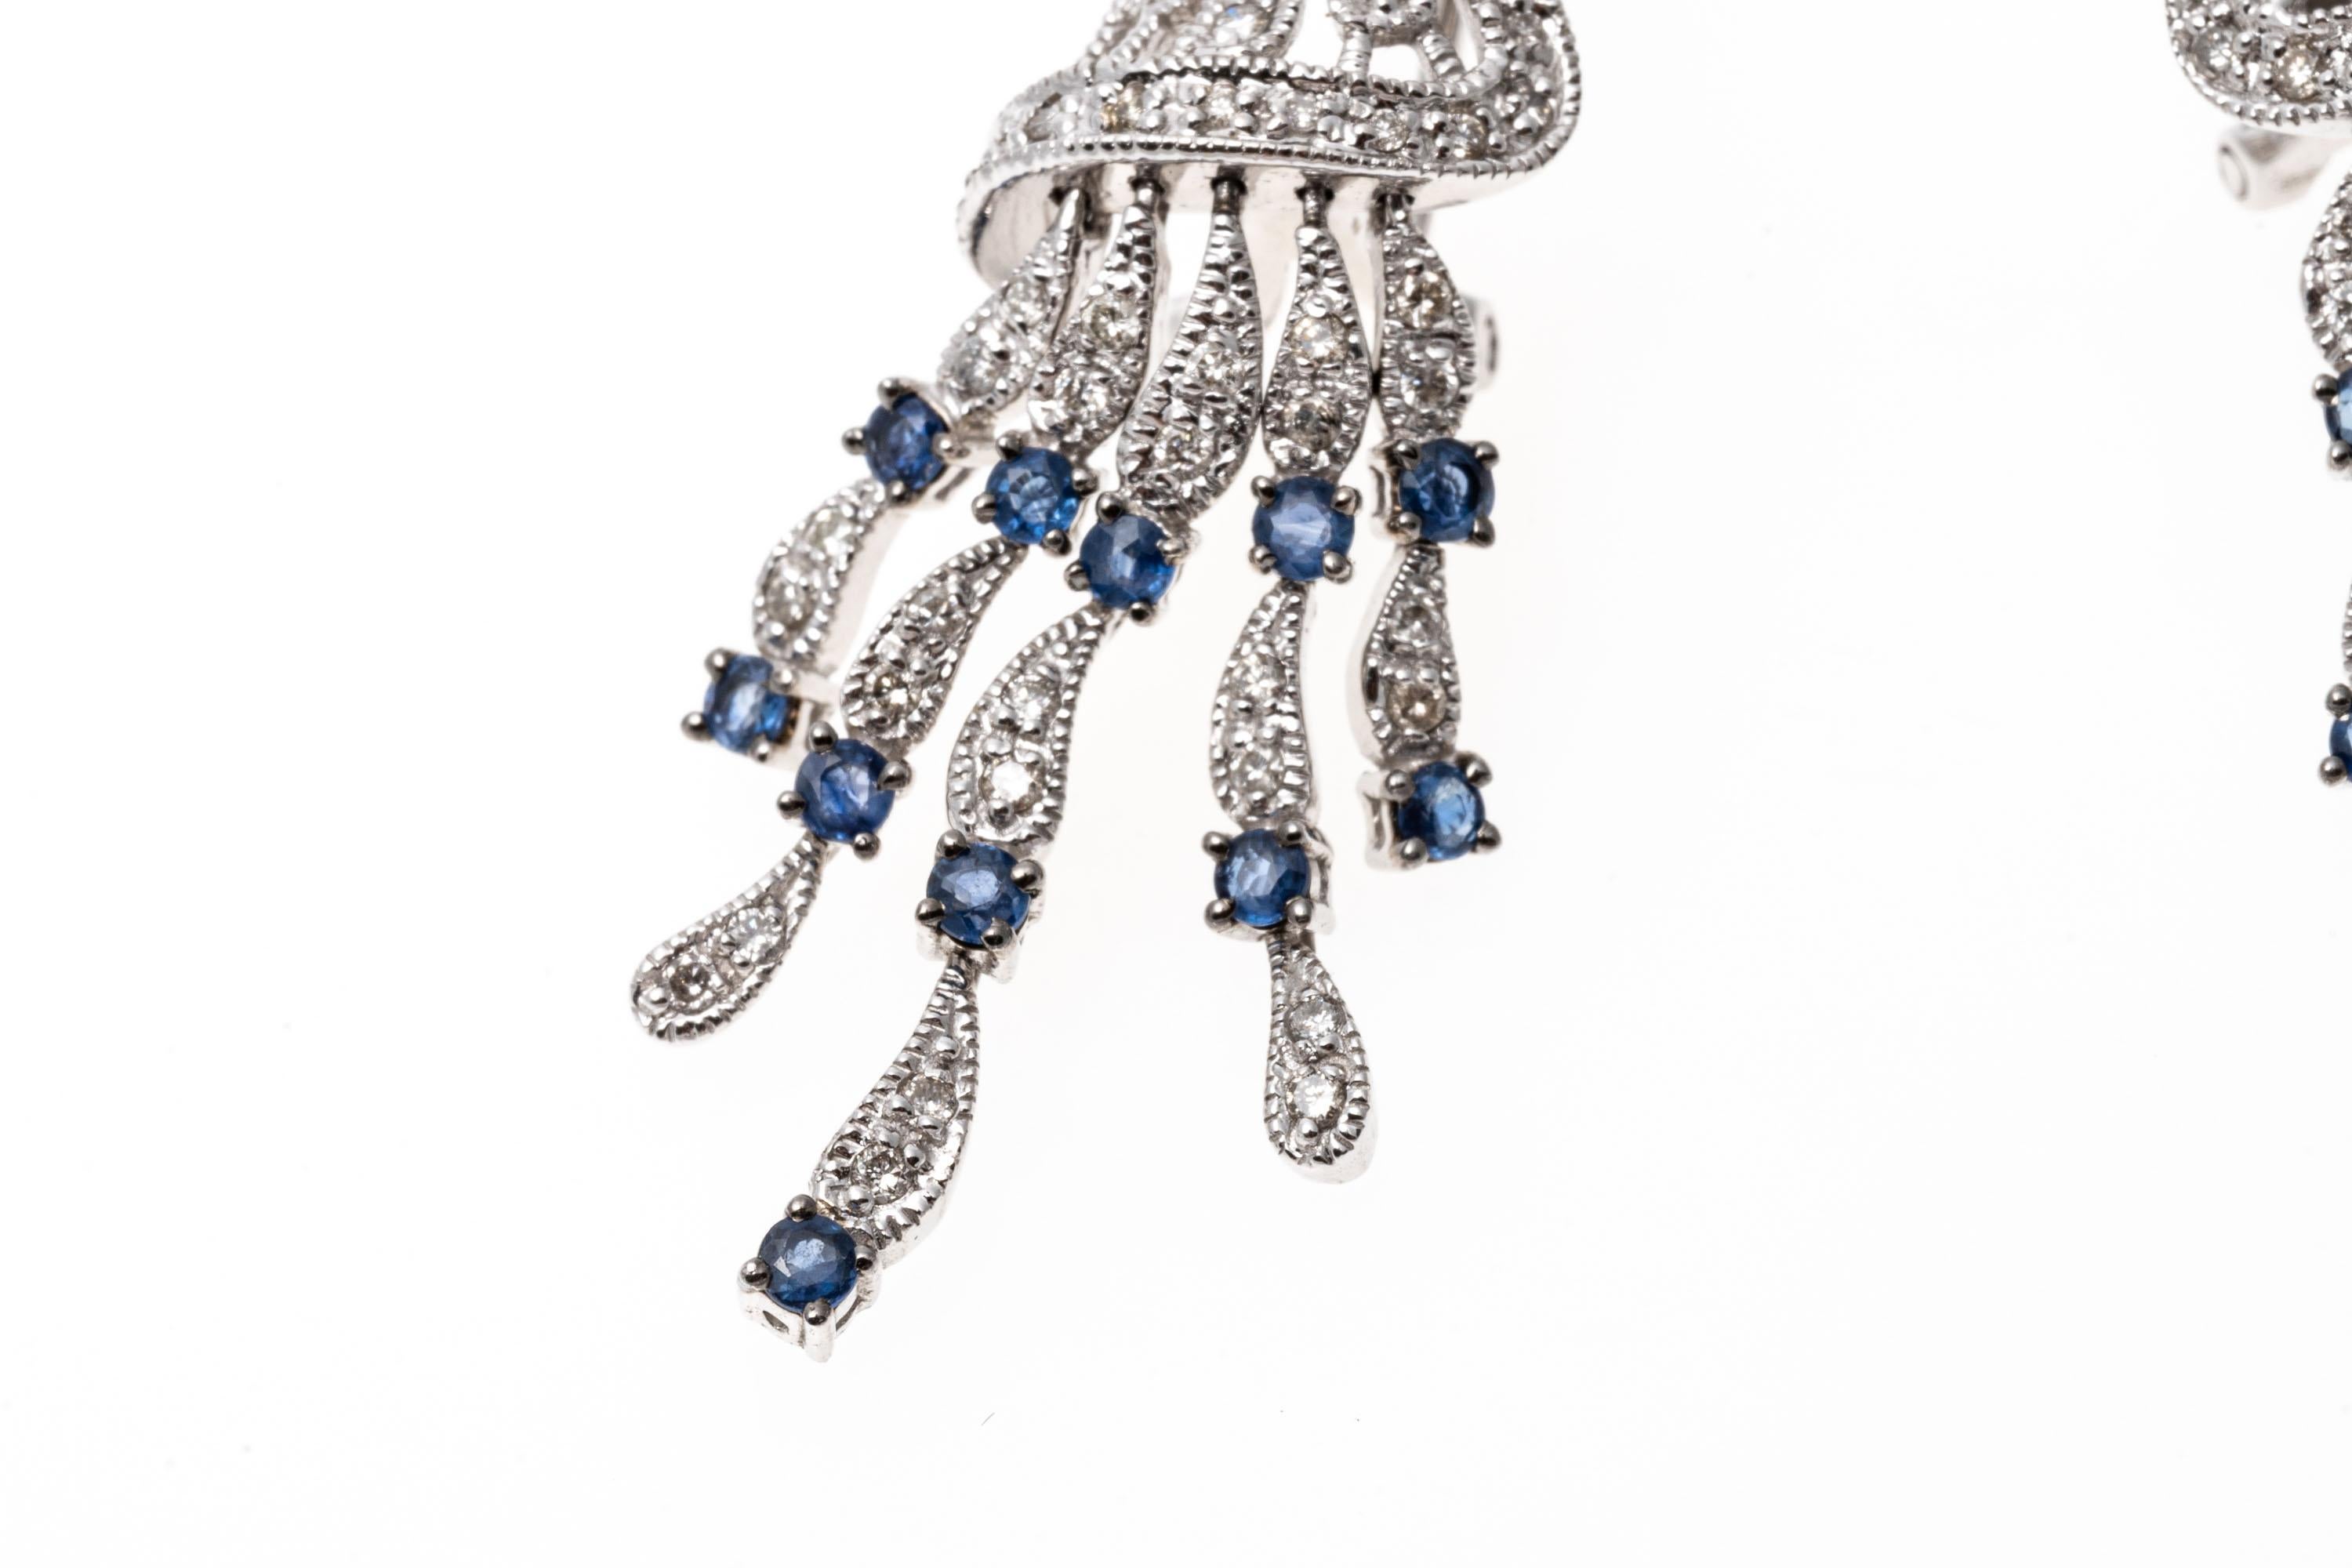 Crafted of 14K white gold, these dynamic earrings showcase an opposing design set with diamonds. Suspended from the base of the earrings are five graduated tassels of diamonds and bright blue sapphires. The diamonds are approximately 0.74 TCW and